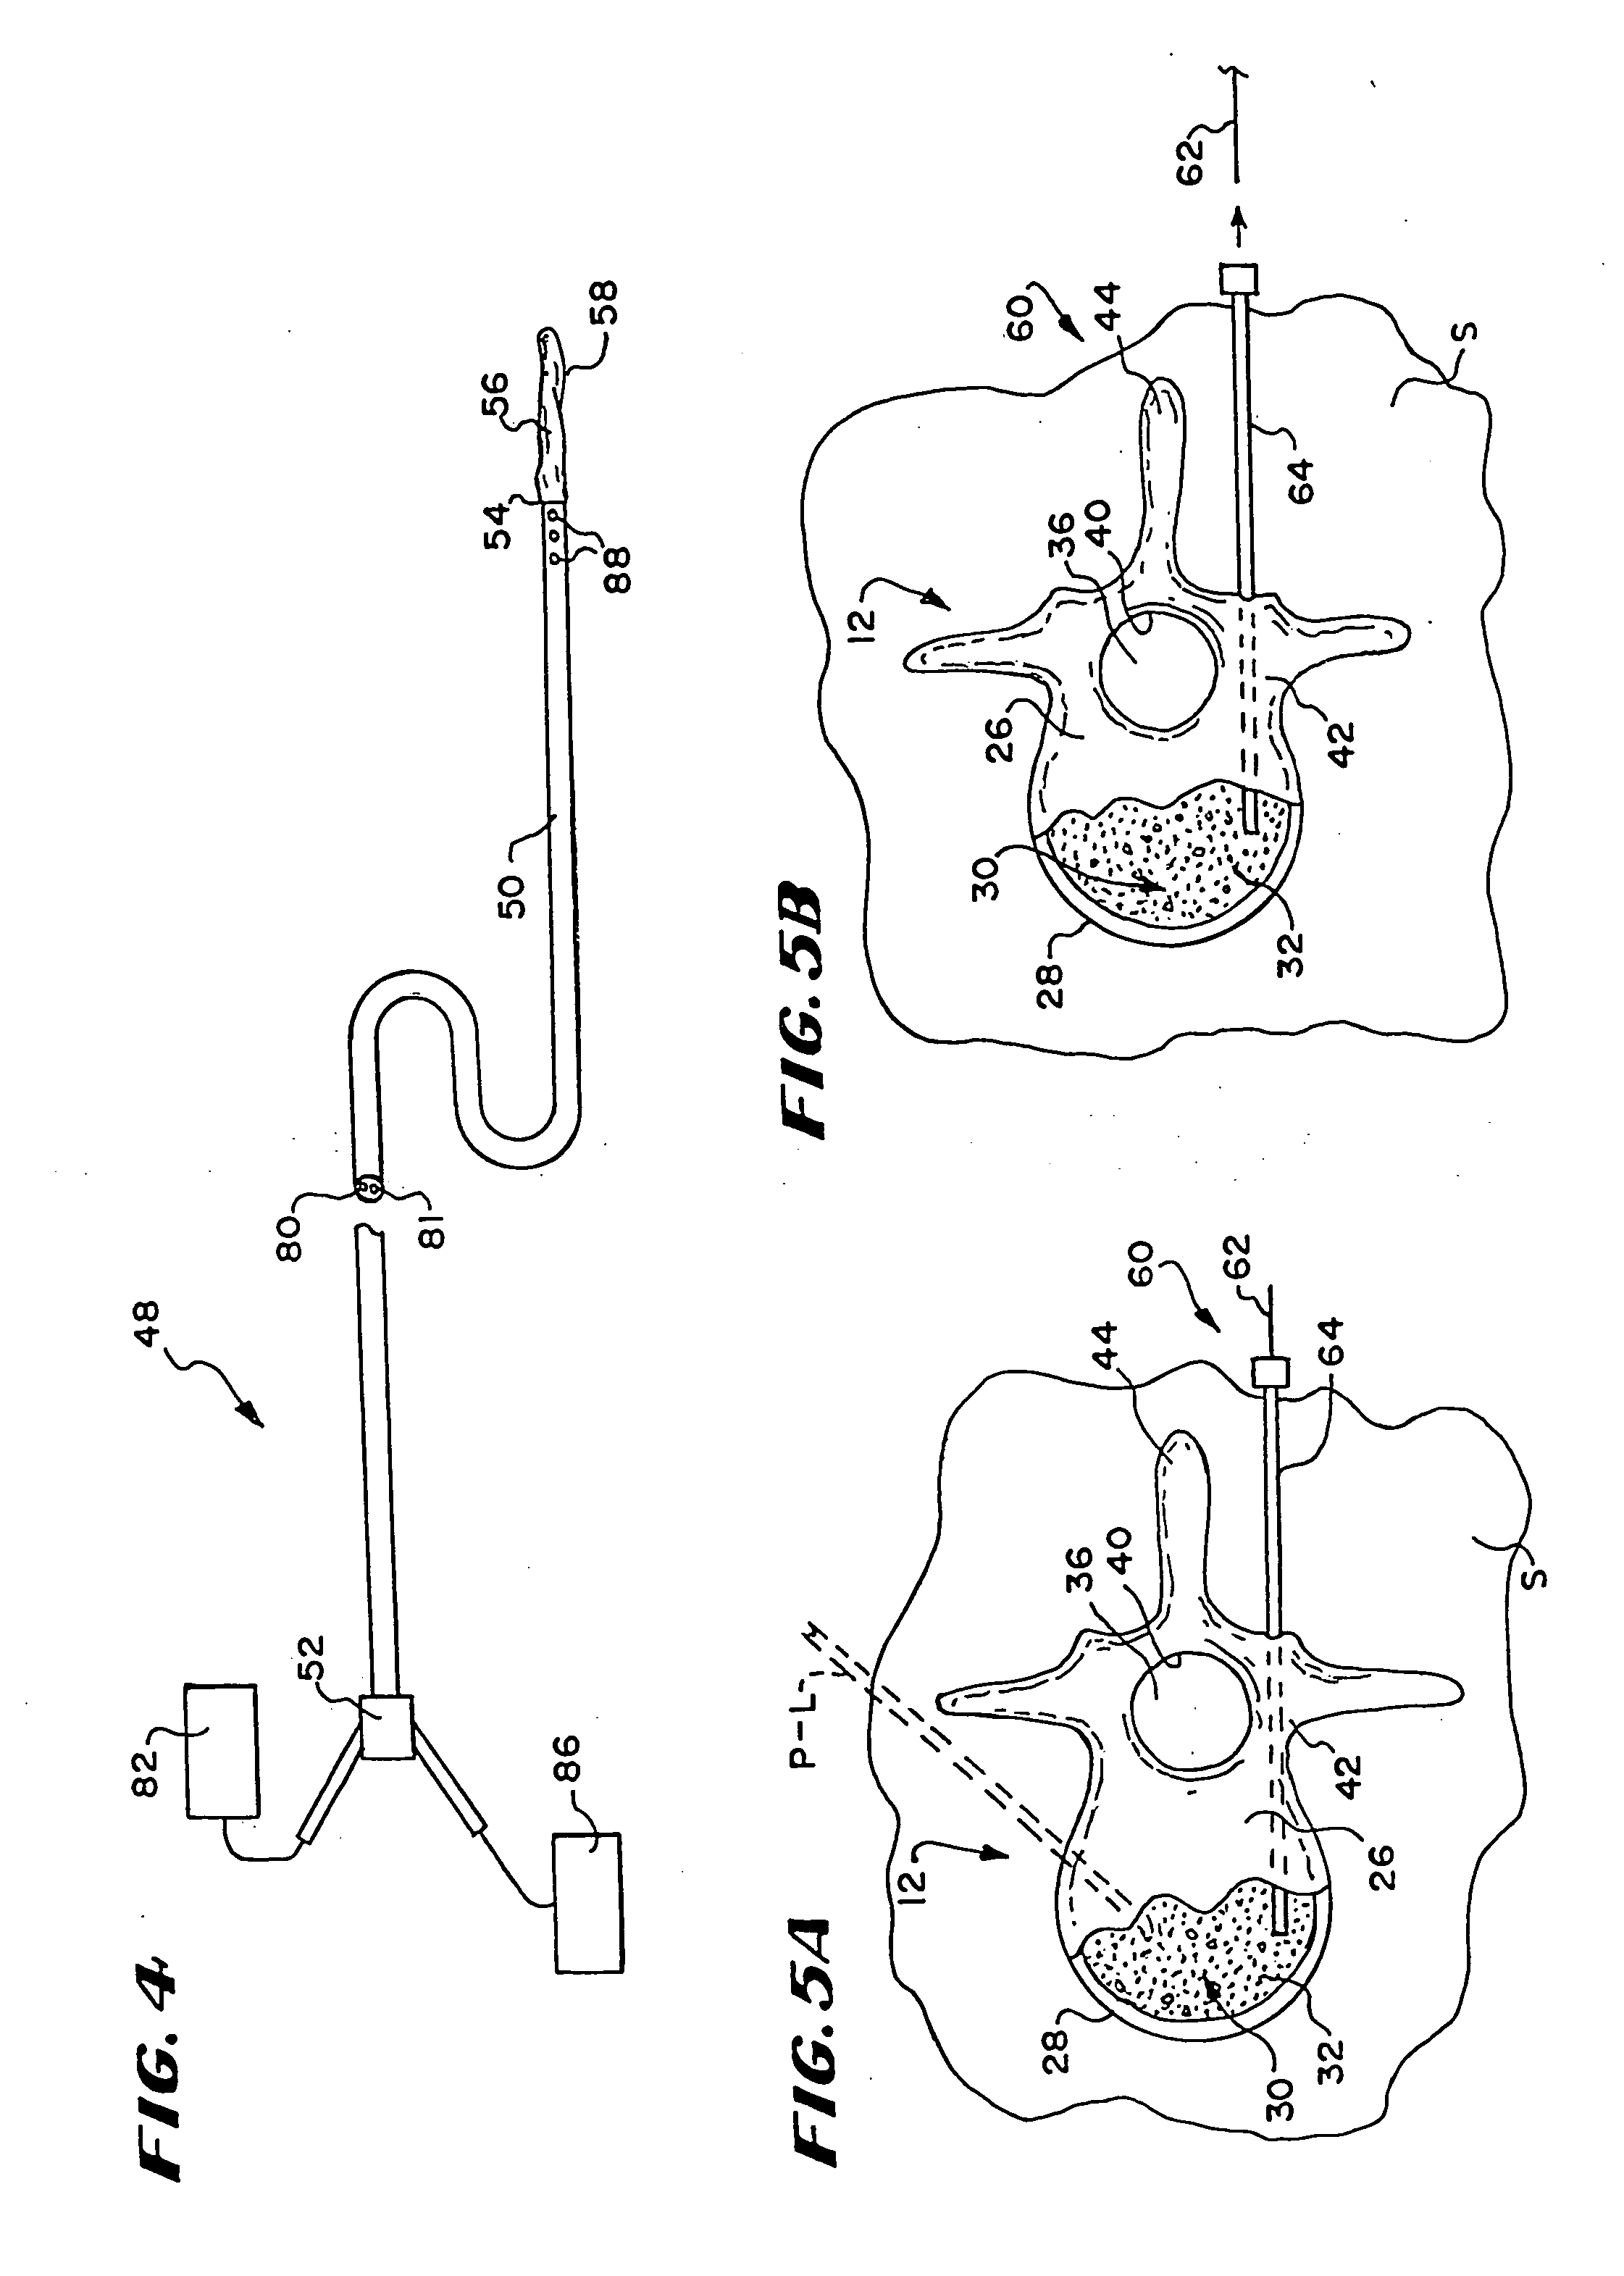 Systems and methods for treating fractured or diseased bone using expandable bodies